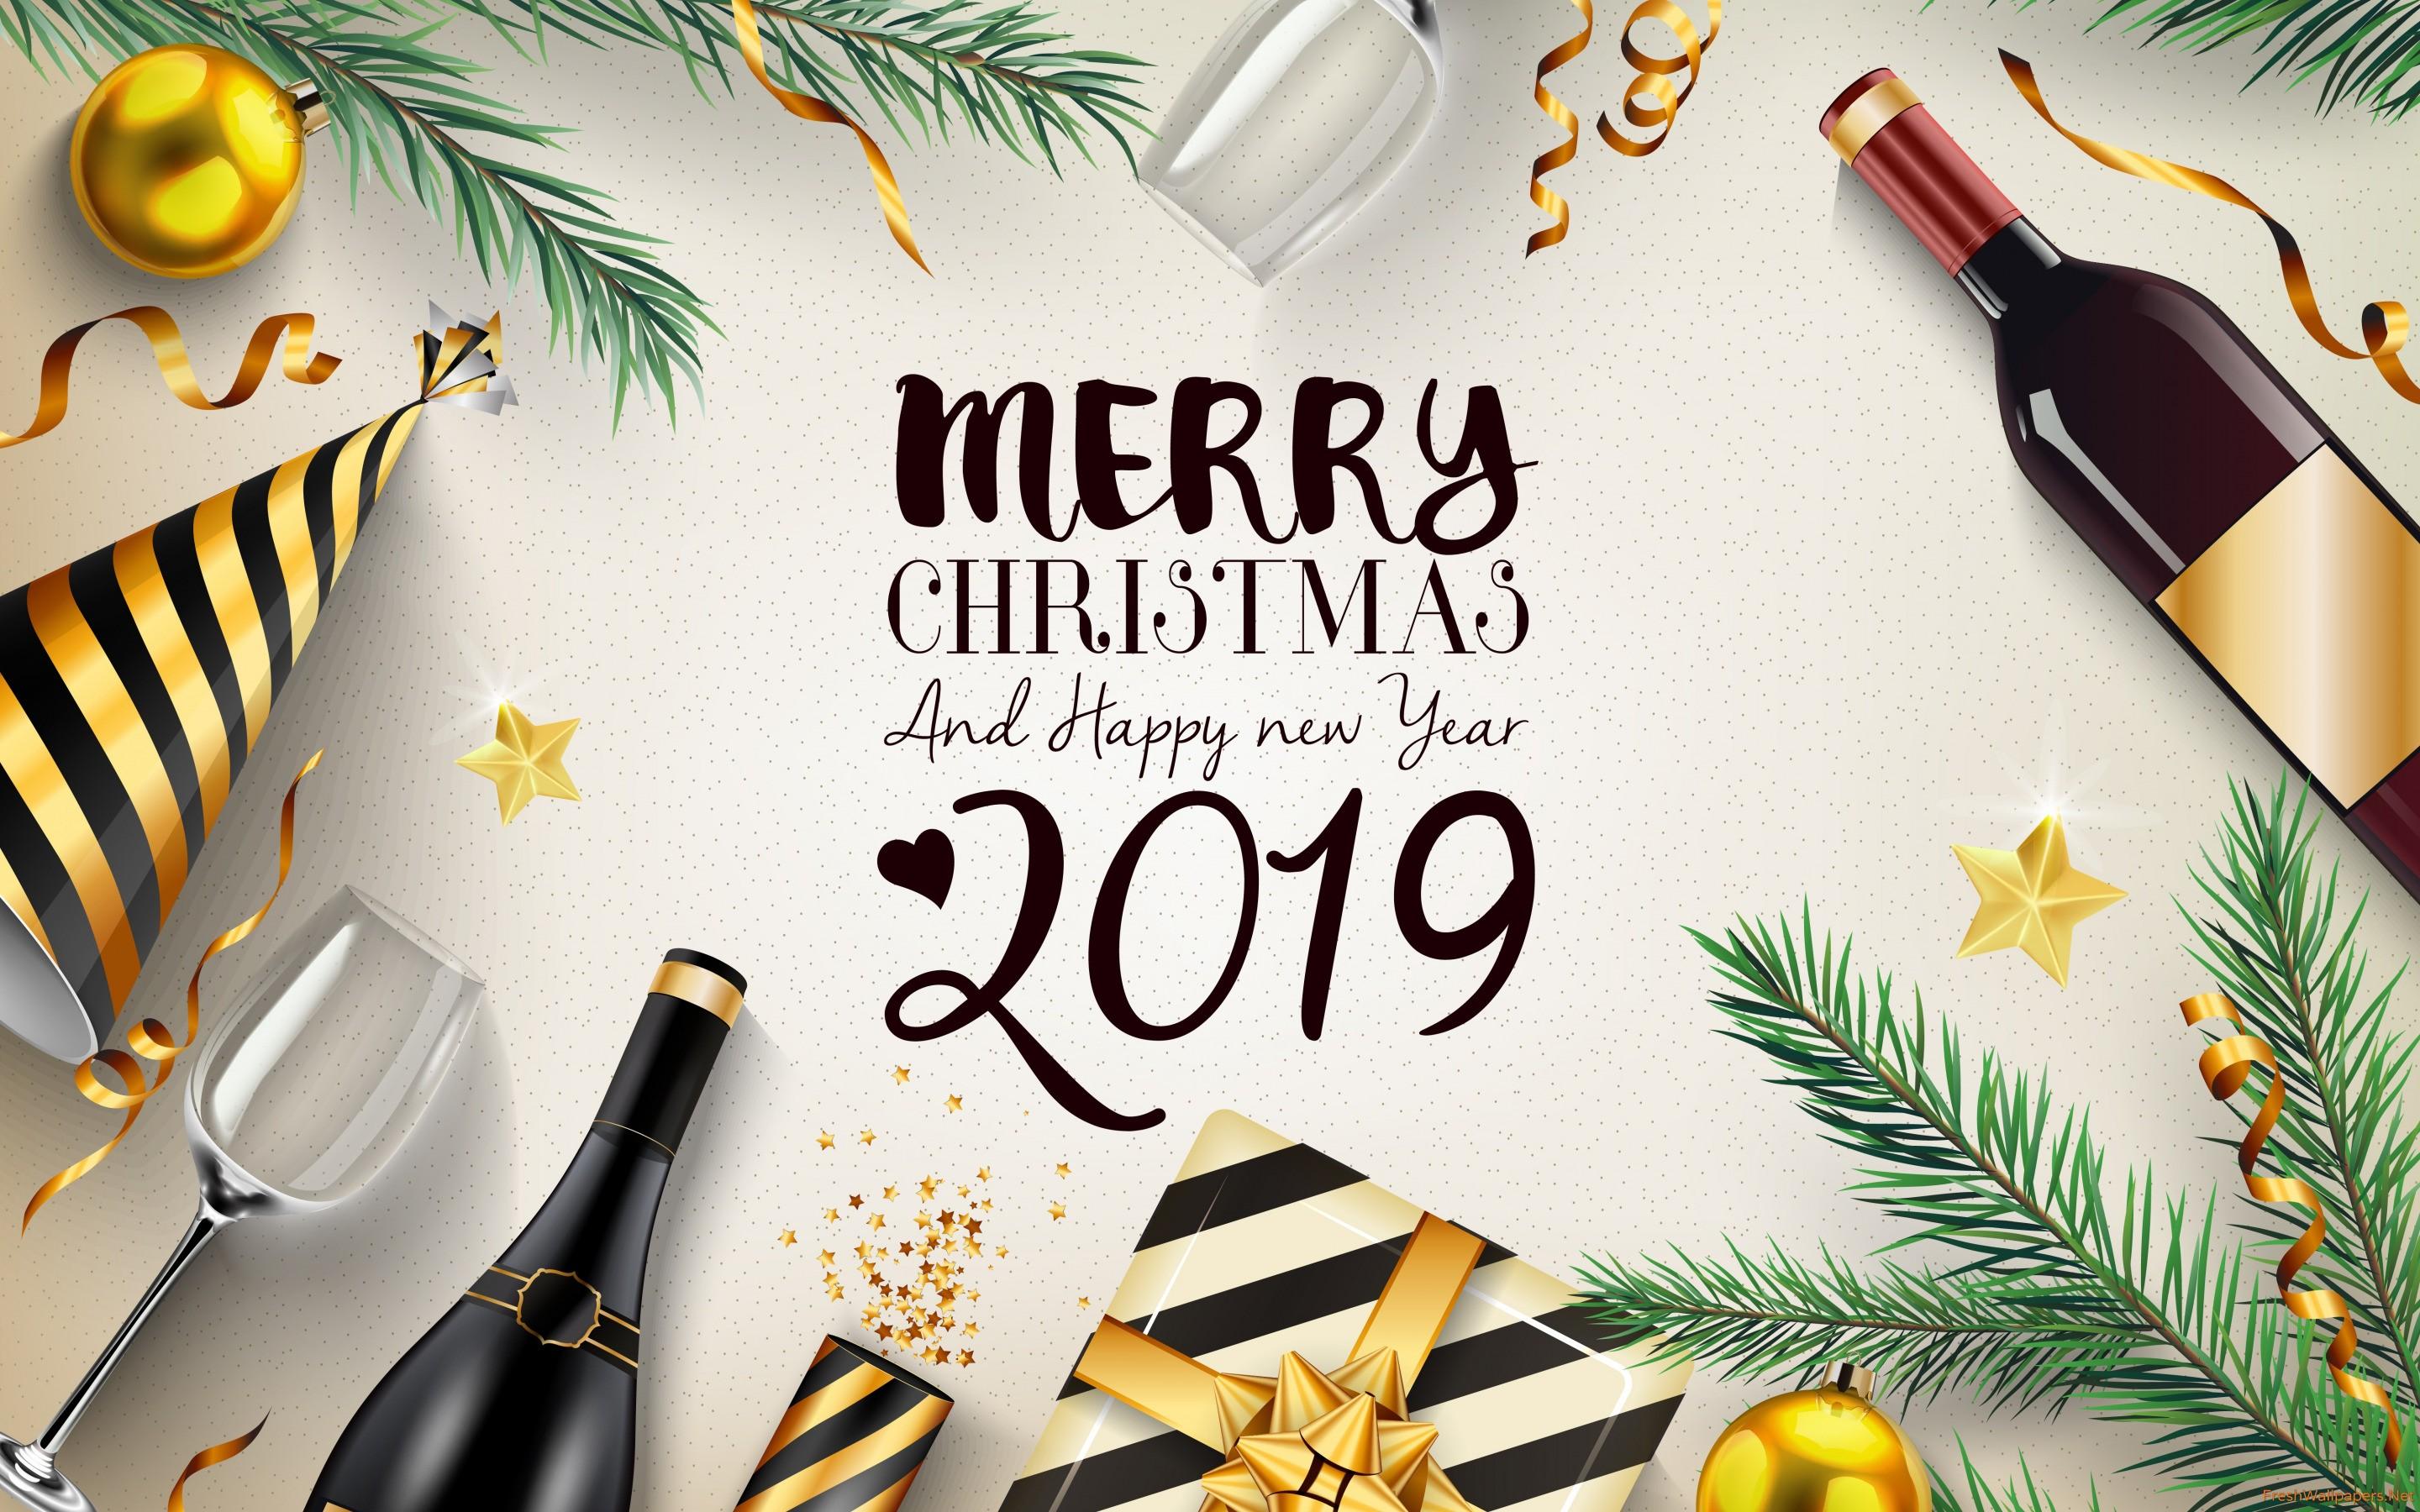 Merry Christmas 2019 wallpapers